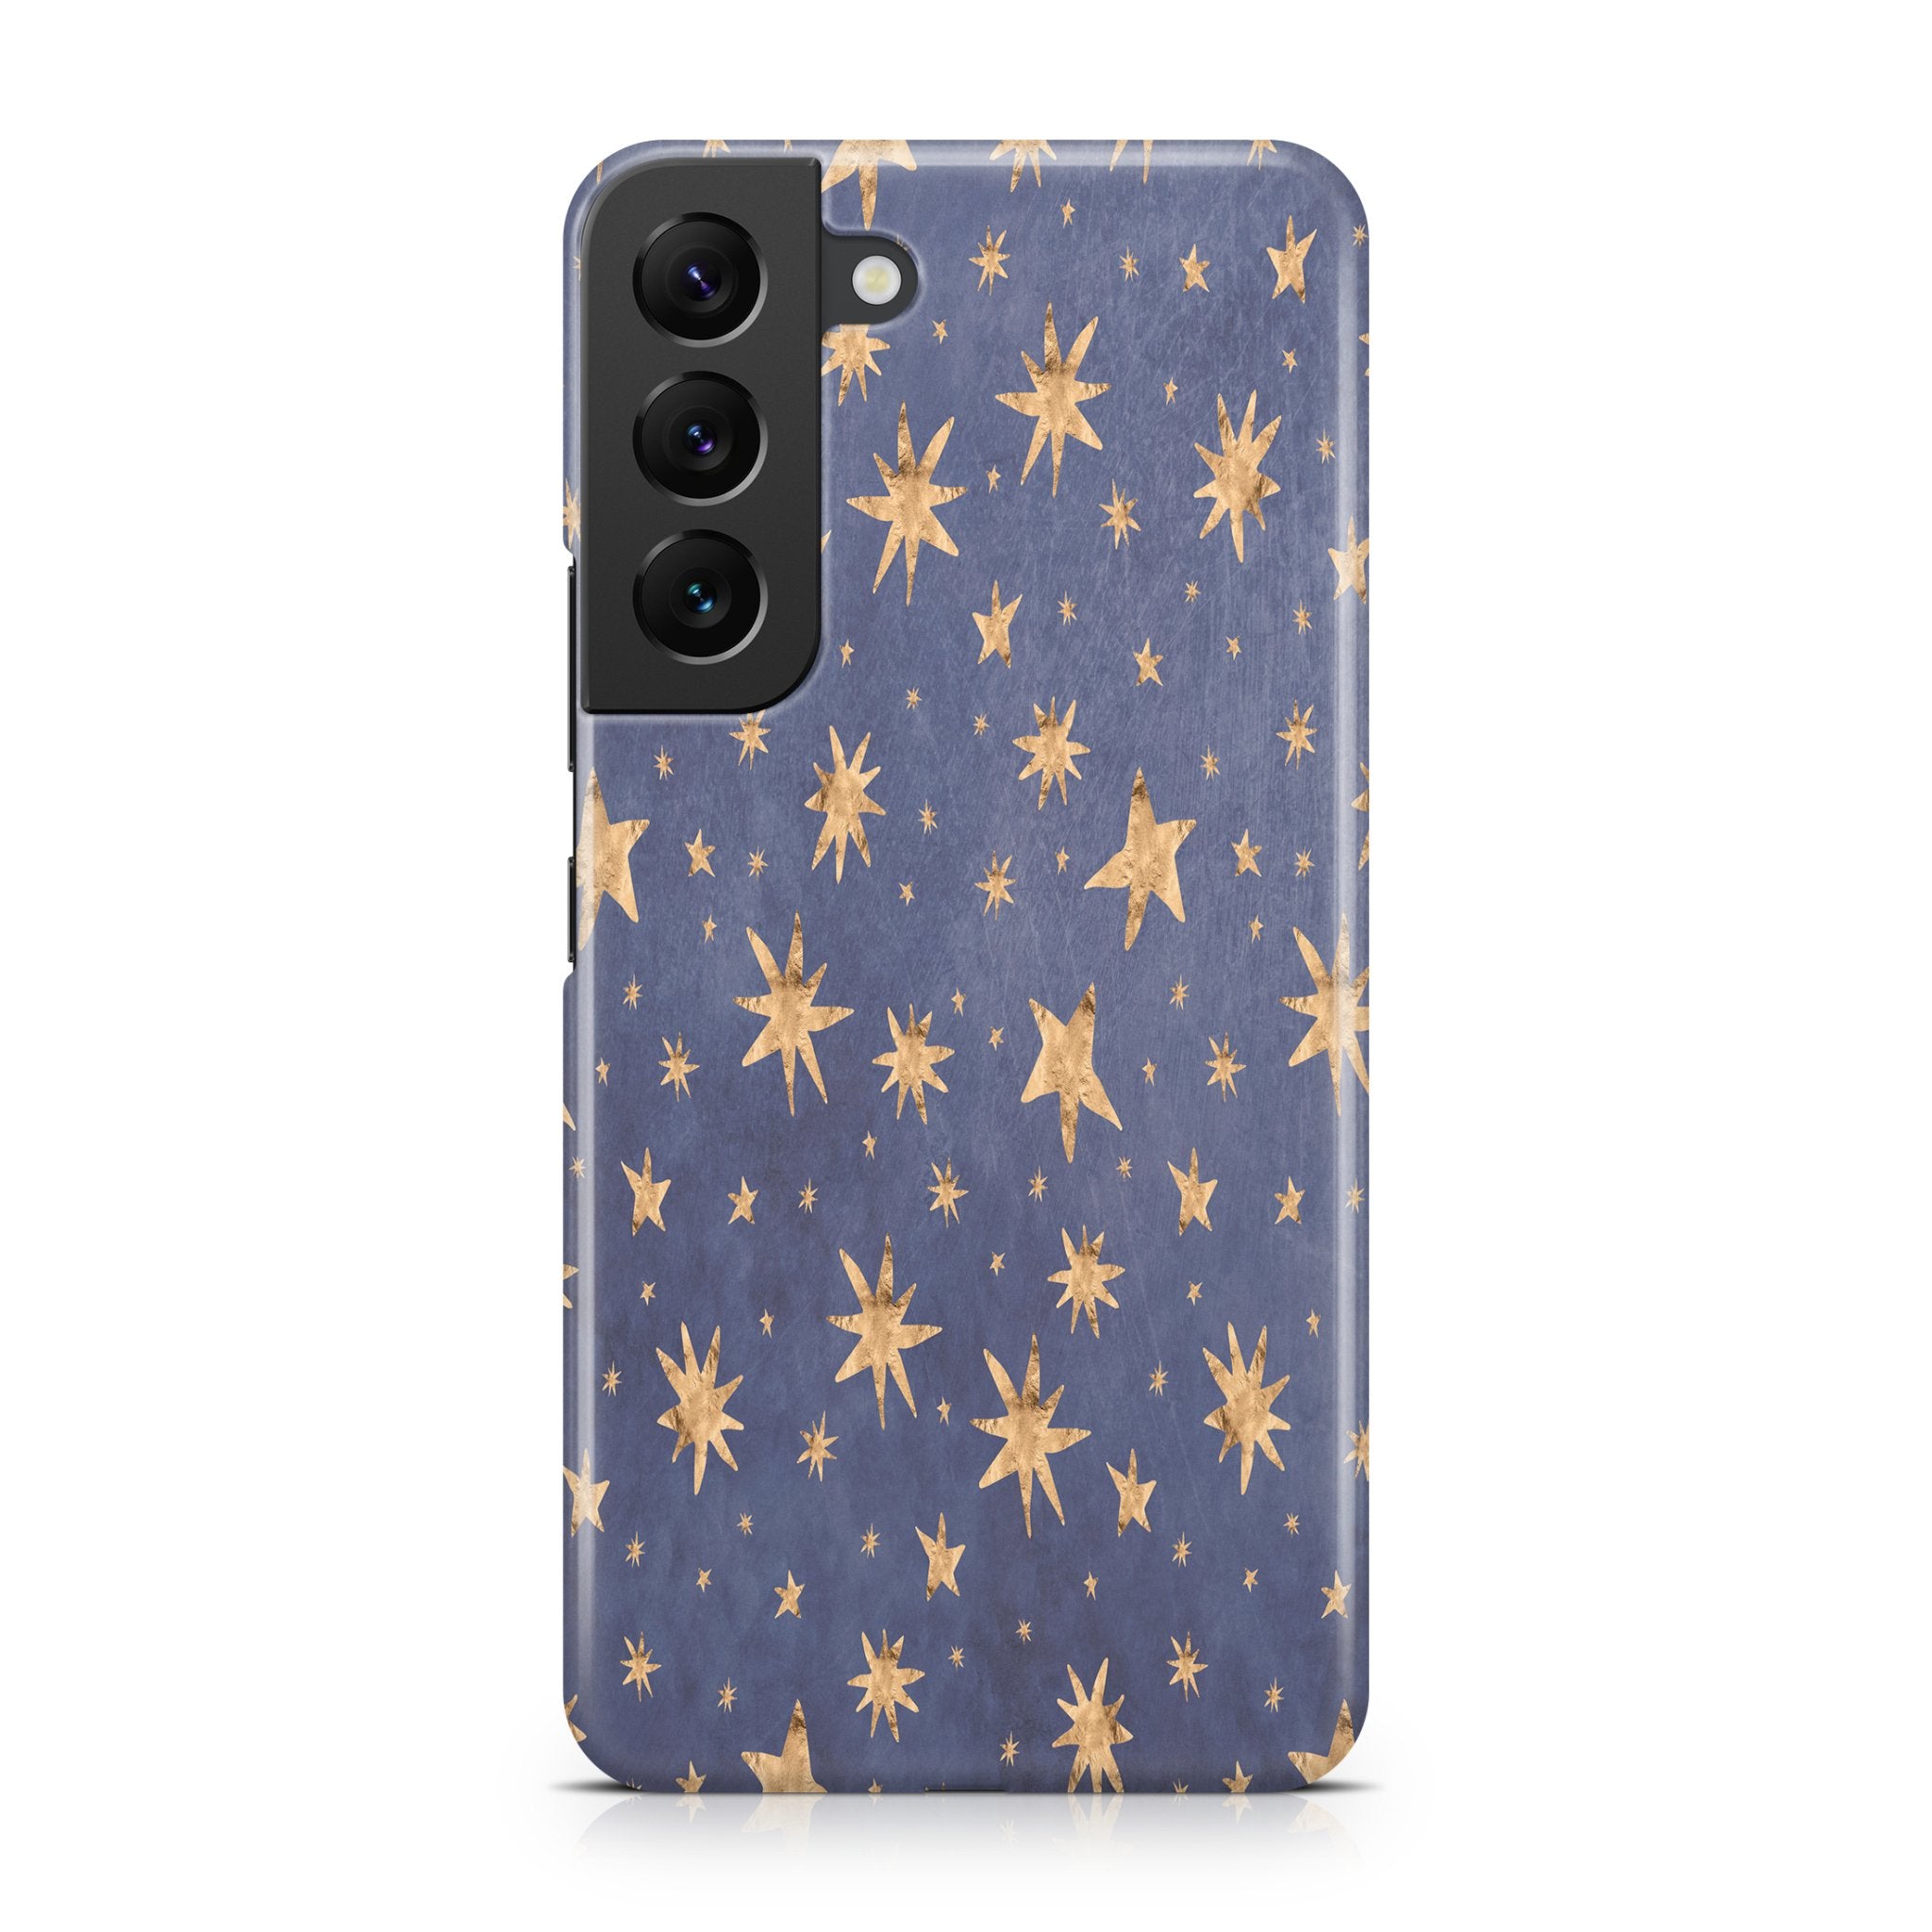 Starry Night - Samsung phone case designs by CaseSwagger